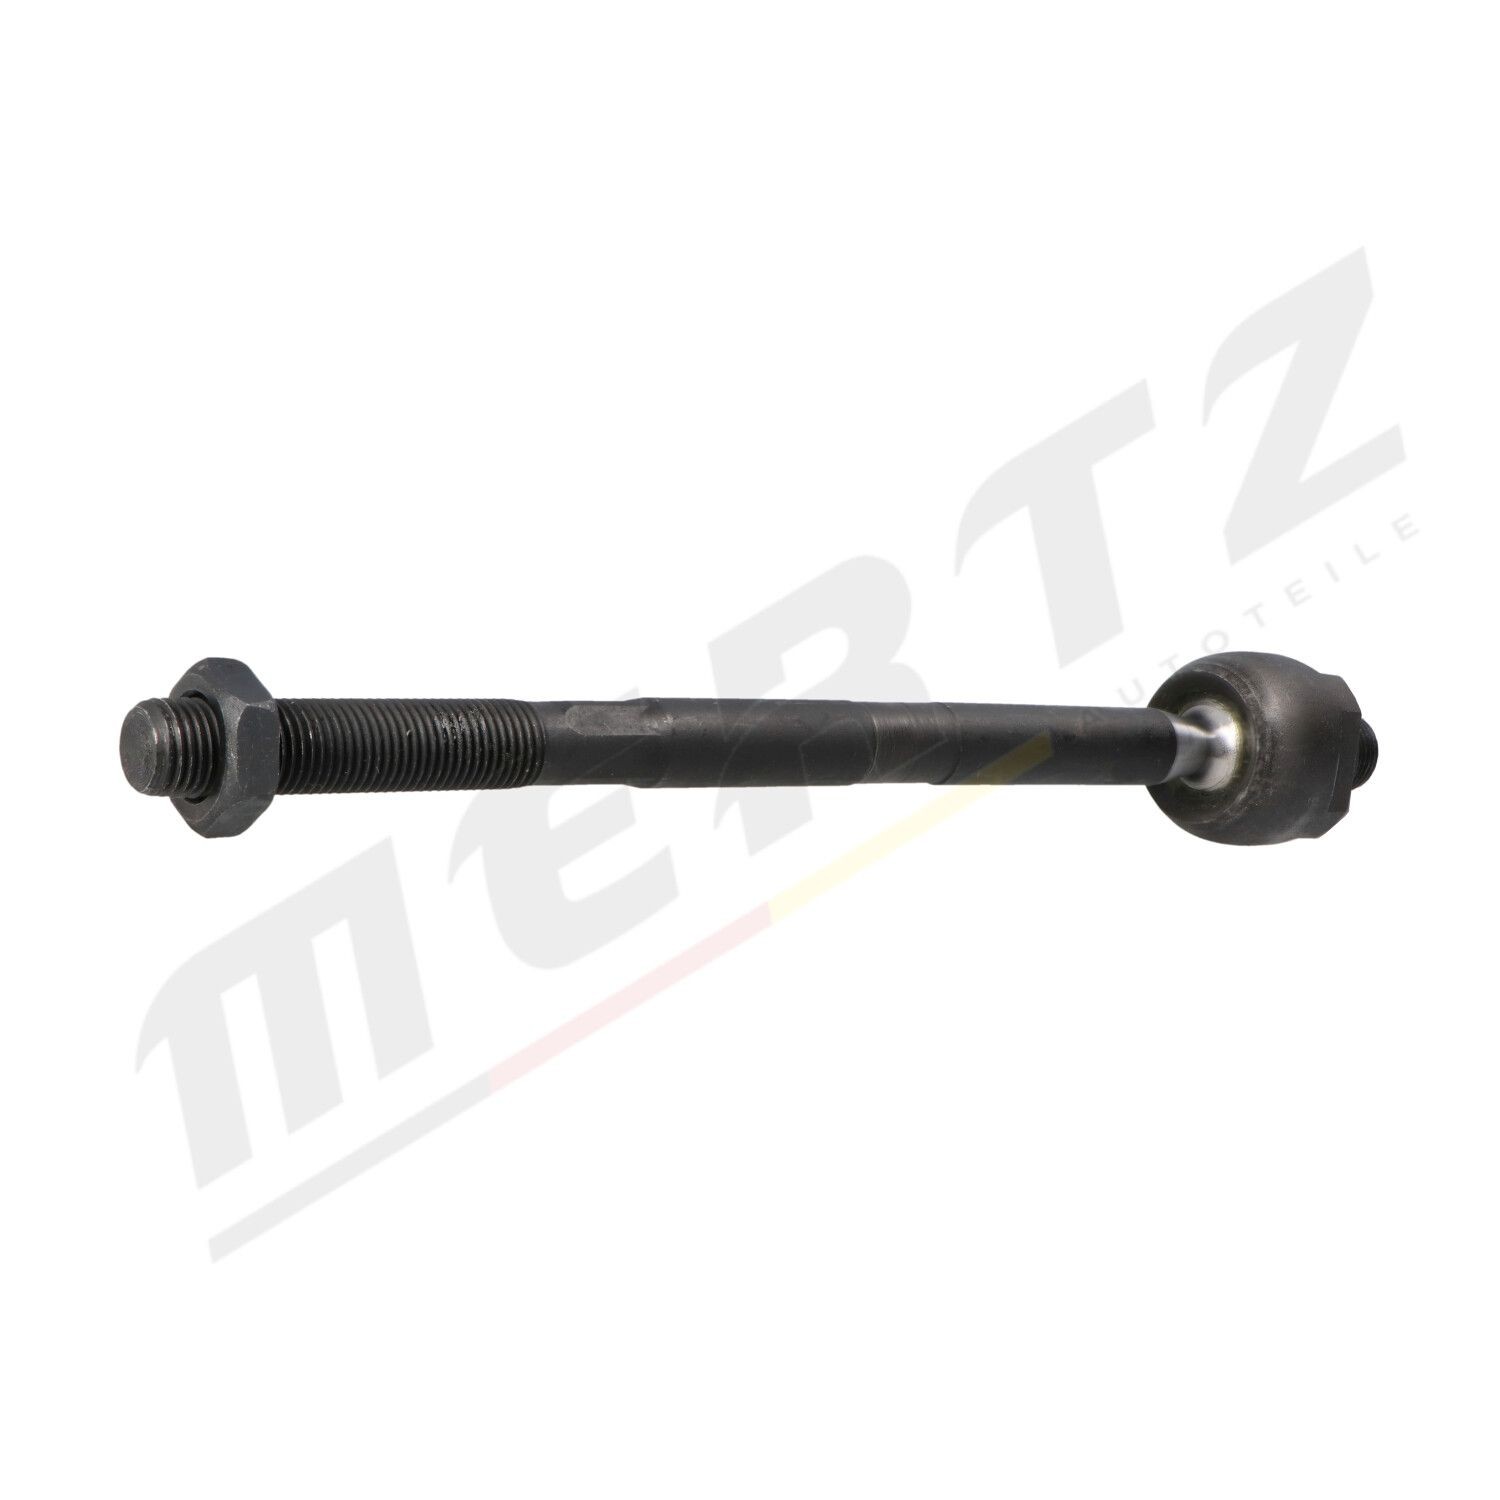 M-S0015 Steering rack end M-S0015 MERTZ Front Axle Left, Front Axle Right, 245 mm